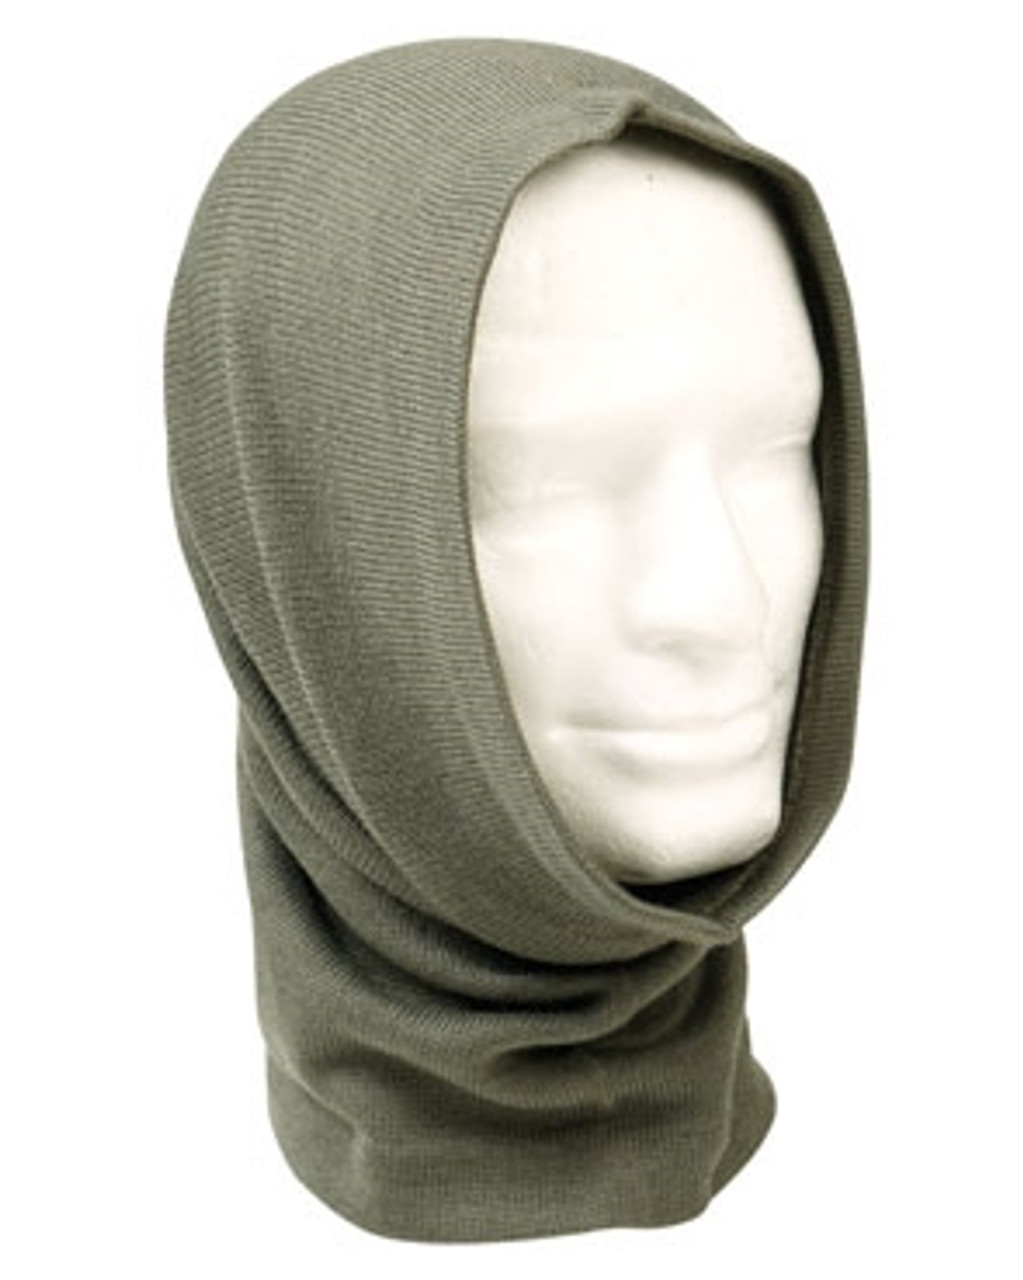 Reproduction Head Toque - New from Hessen Antique